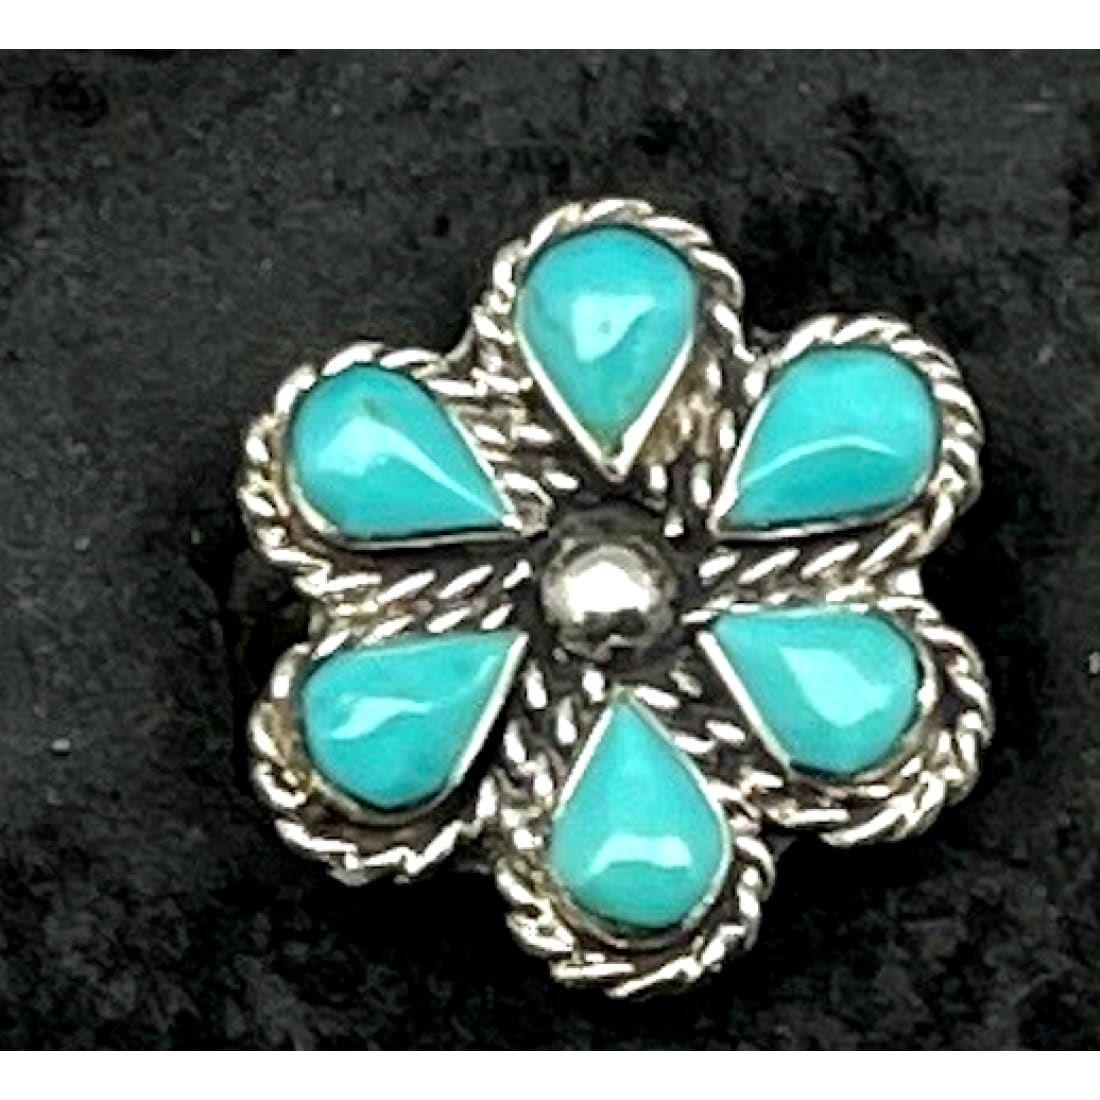 Zuni Turquoise Cluster Ring Sz 7 Sterling Silver Native